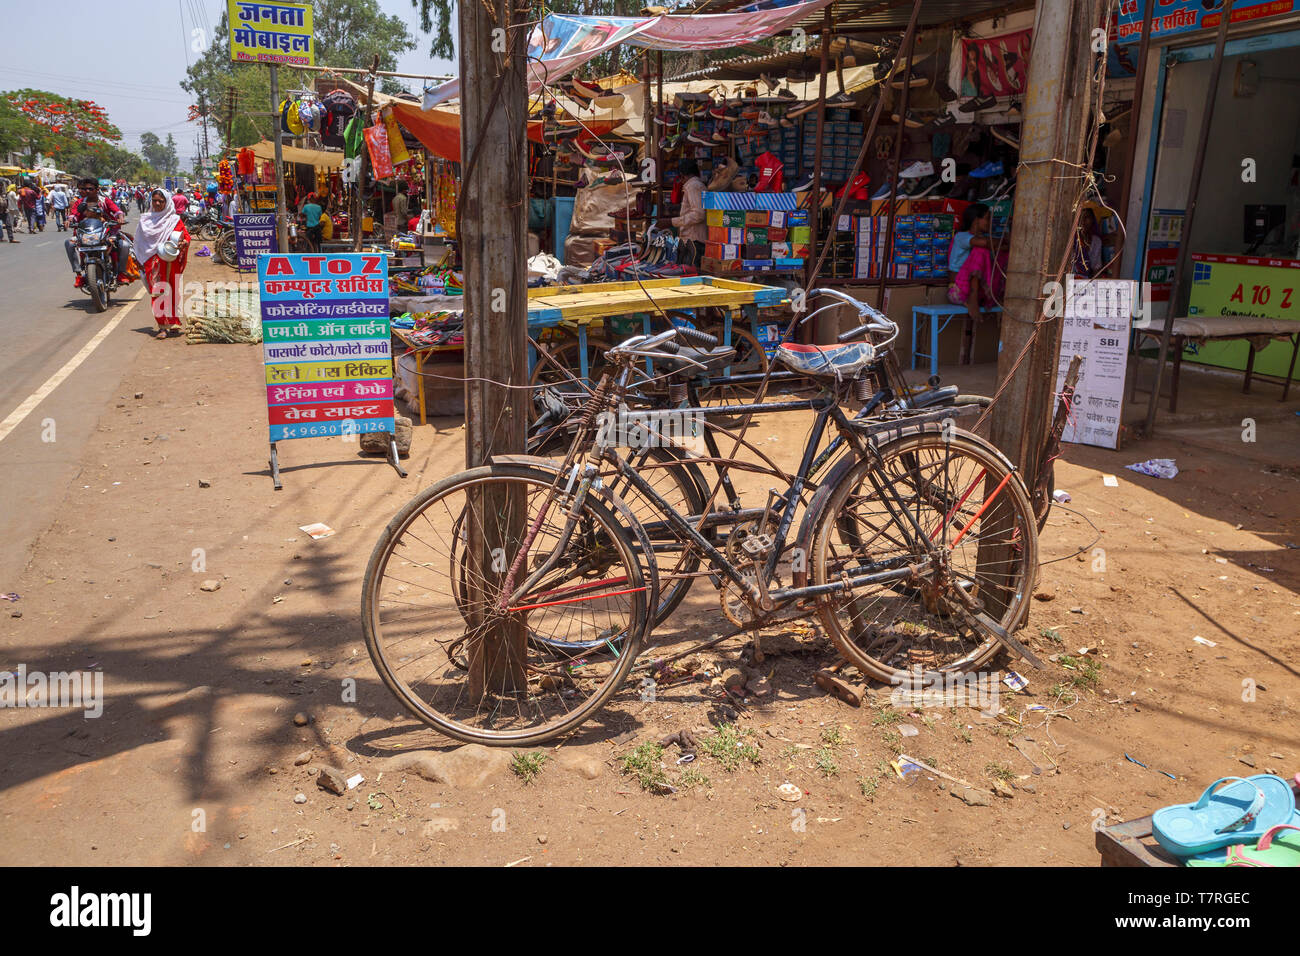 Old bicycles by the roadside in the market in the main street of Shahpura, a Dindori district town in the state of Madhya Pradesh, central India Stock Photo